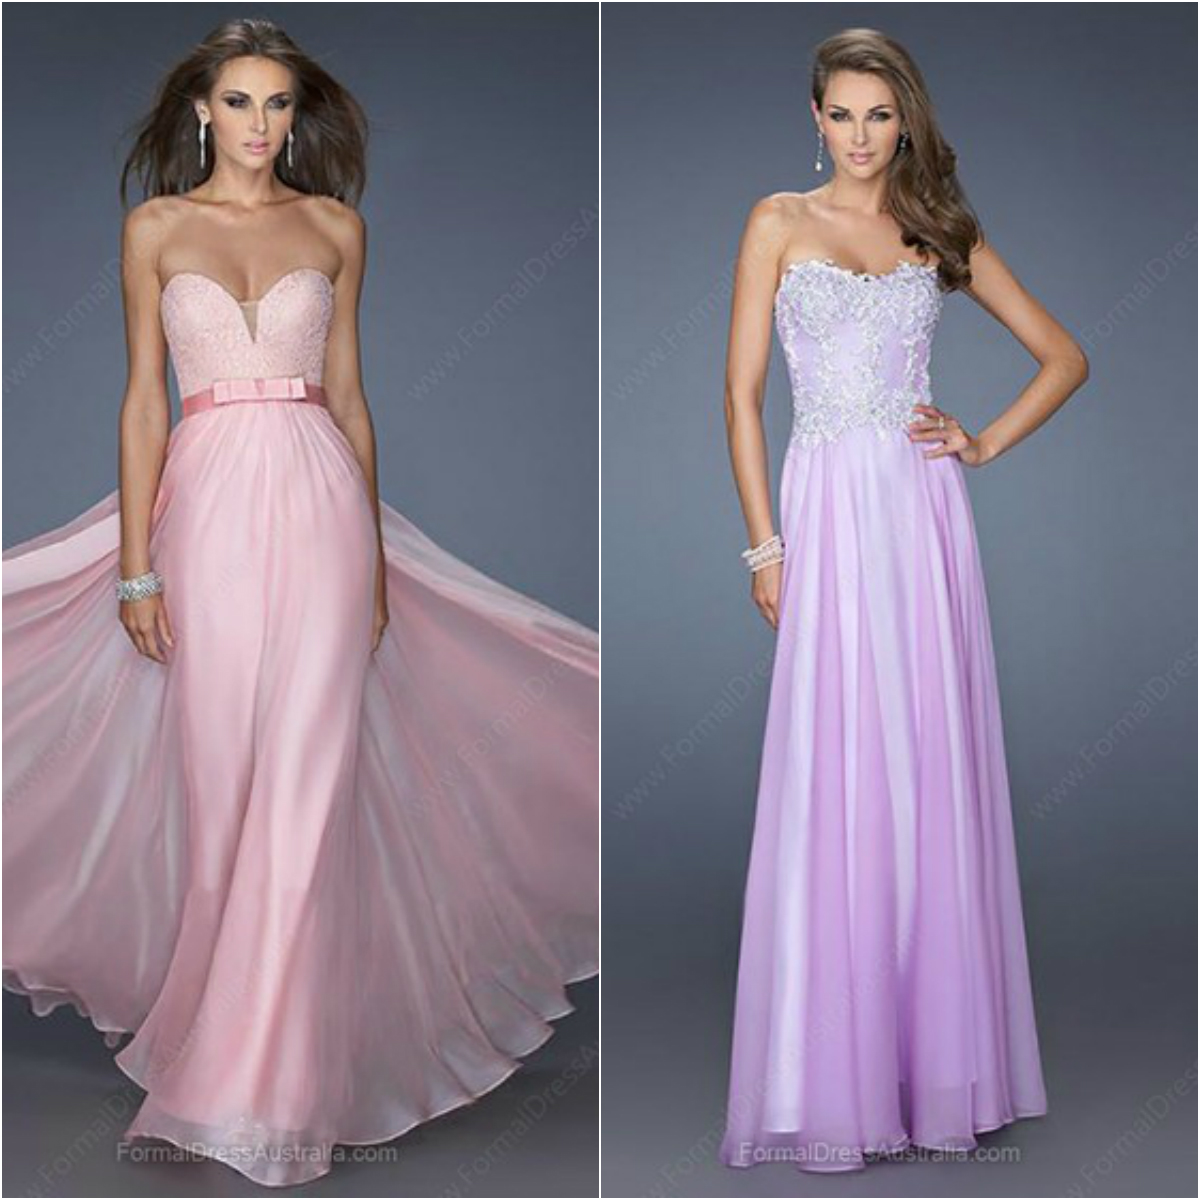 formal dresses - Sydney collection. - LIVE IN FOX WORLD